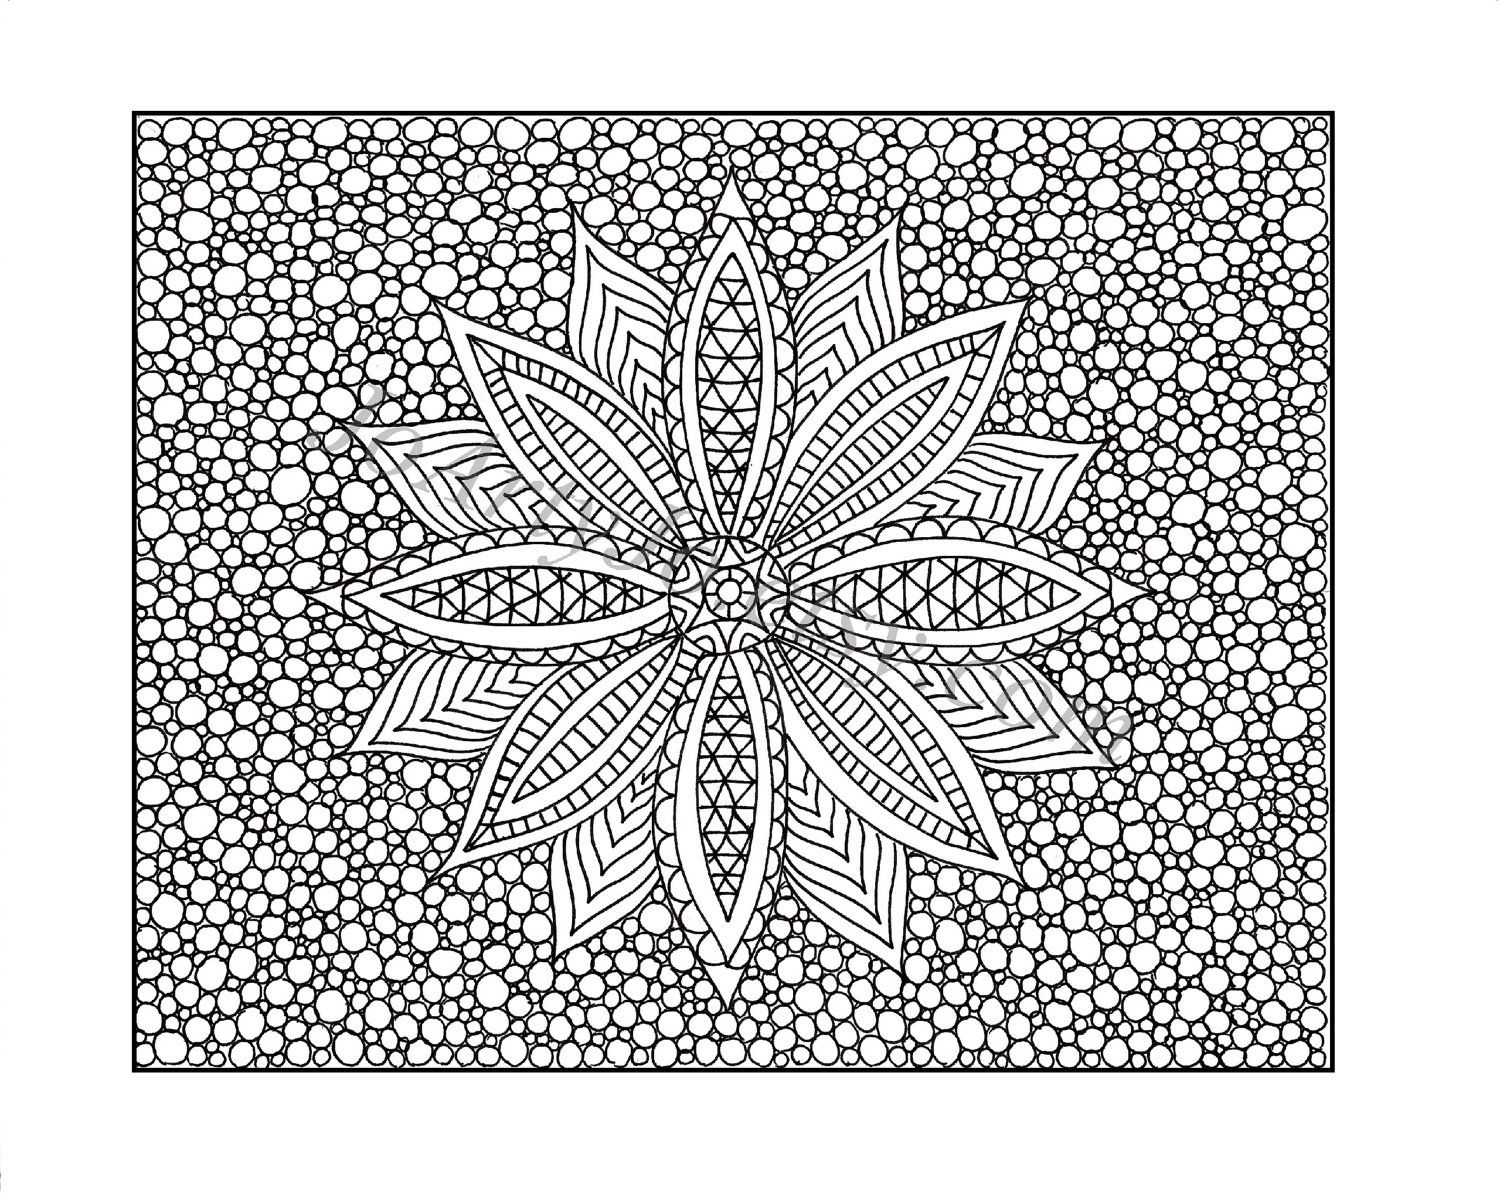 Challenging Coloring Pages (18 Pictures) - Colorine.net | 16737